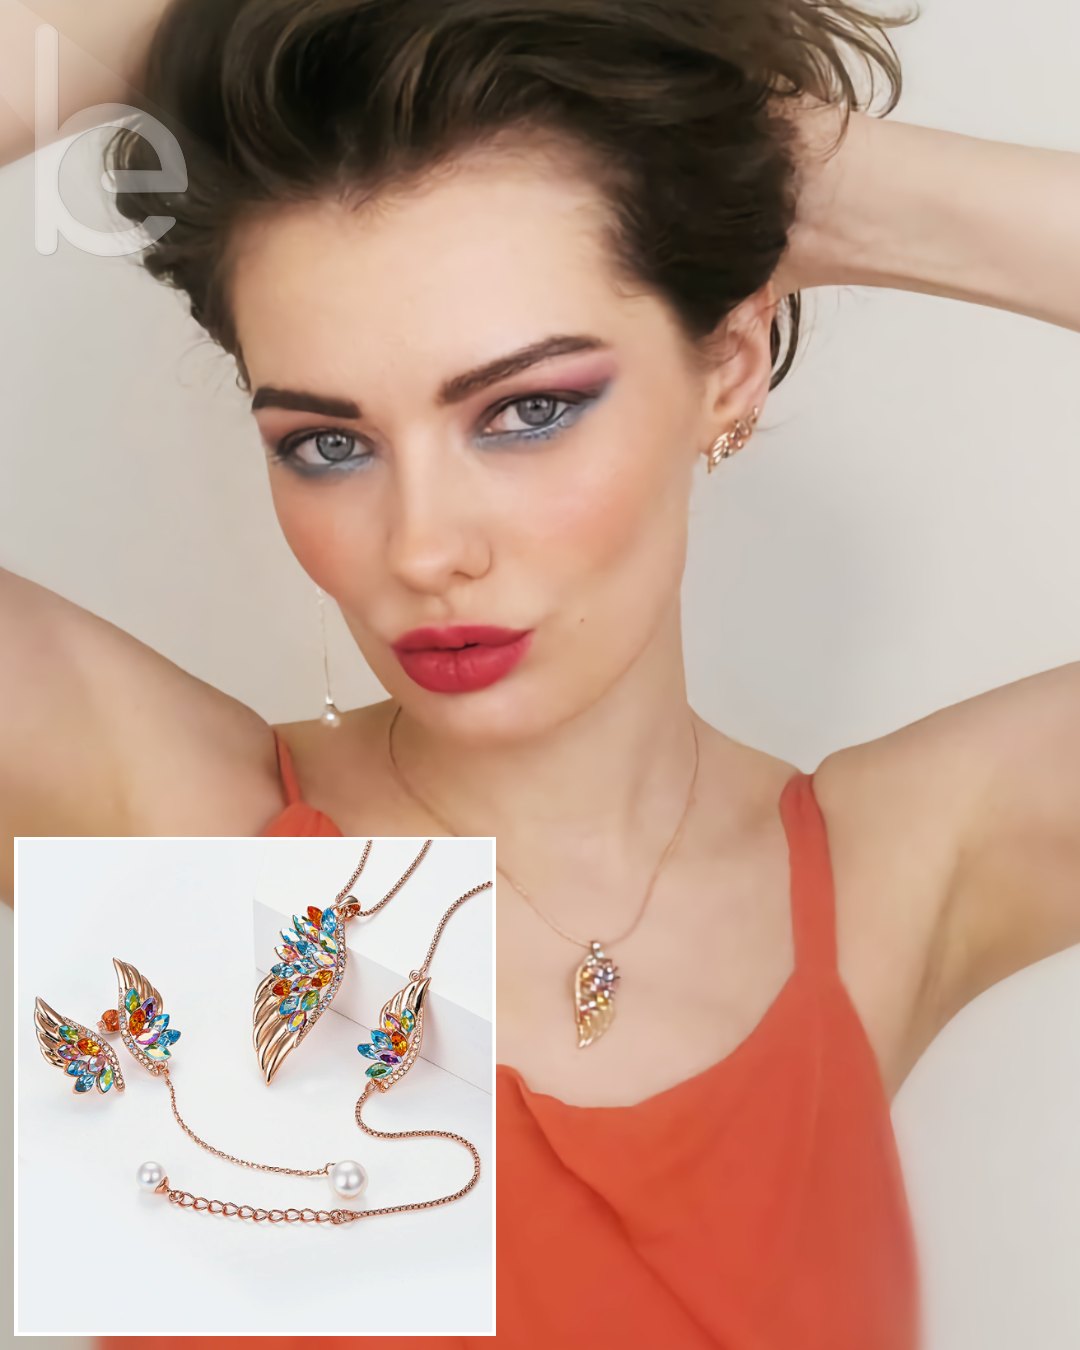 Anna Wearing the Phoenix Rose Gold Pendant, Bracelet and Earrings